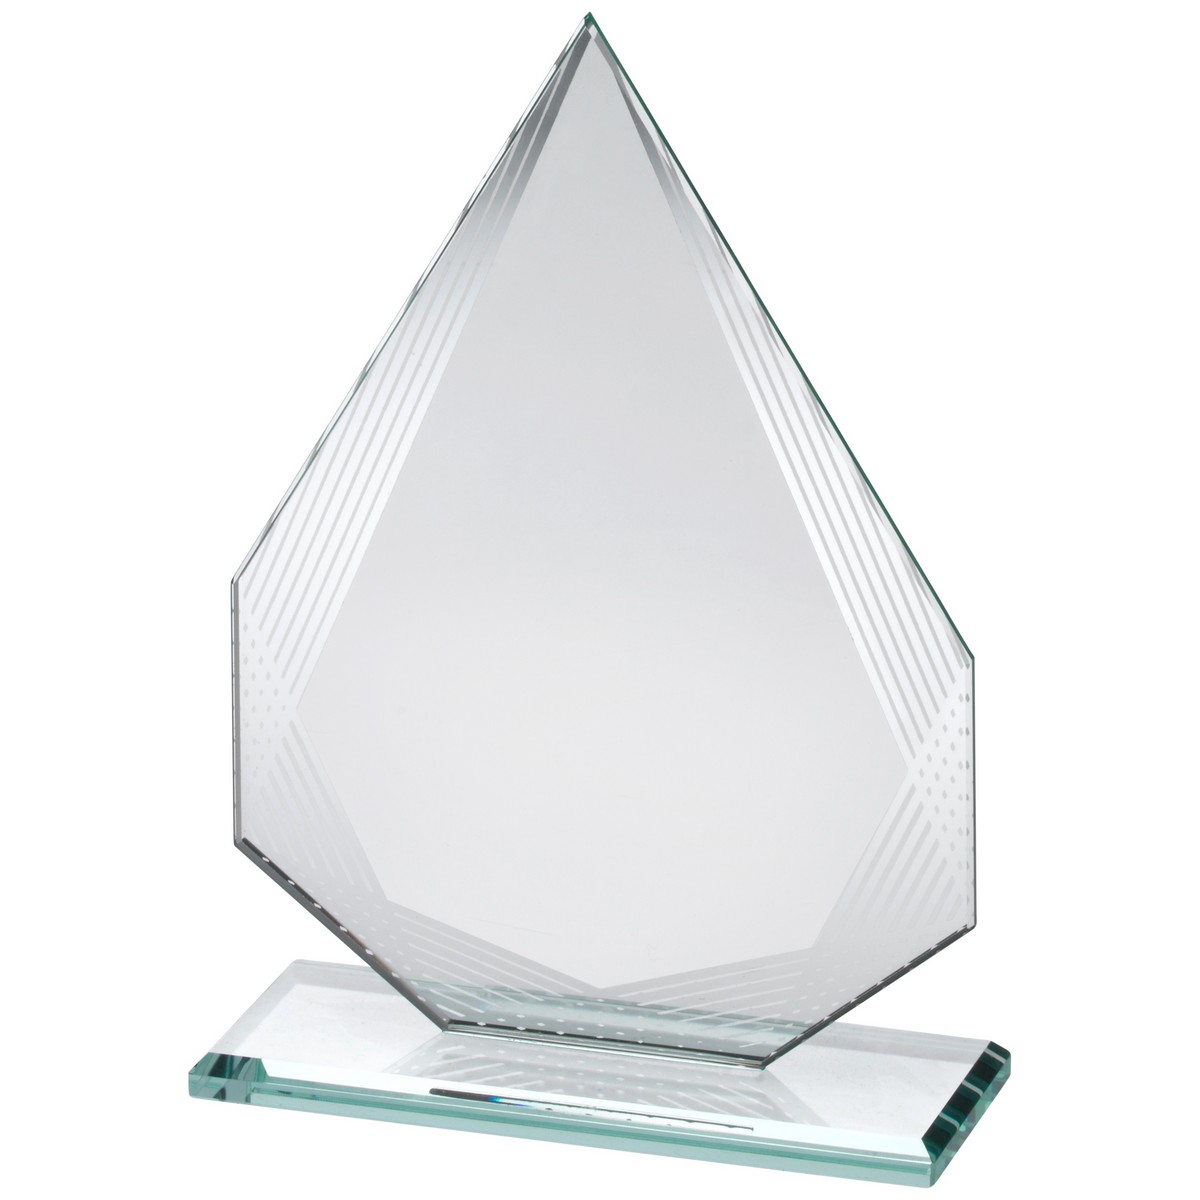 JADE GLASS DIAMOND WITH SILVER LINED EDGES